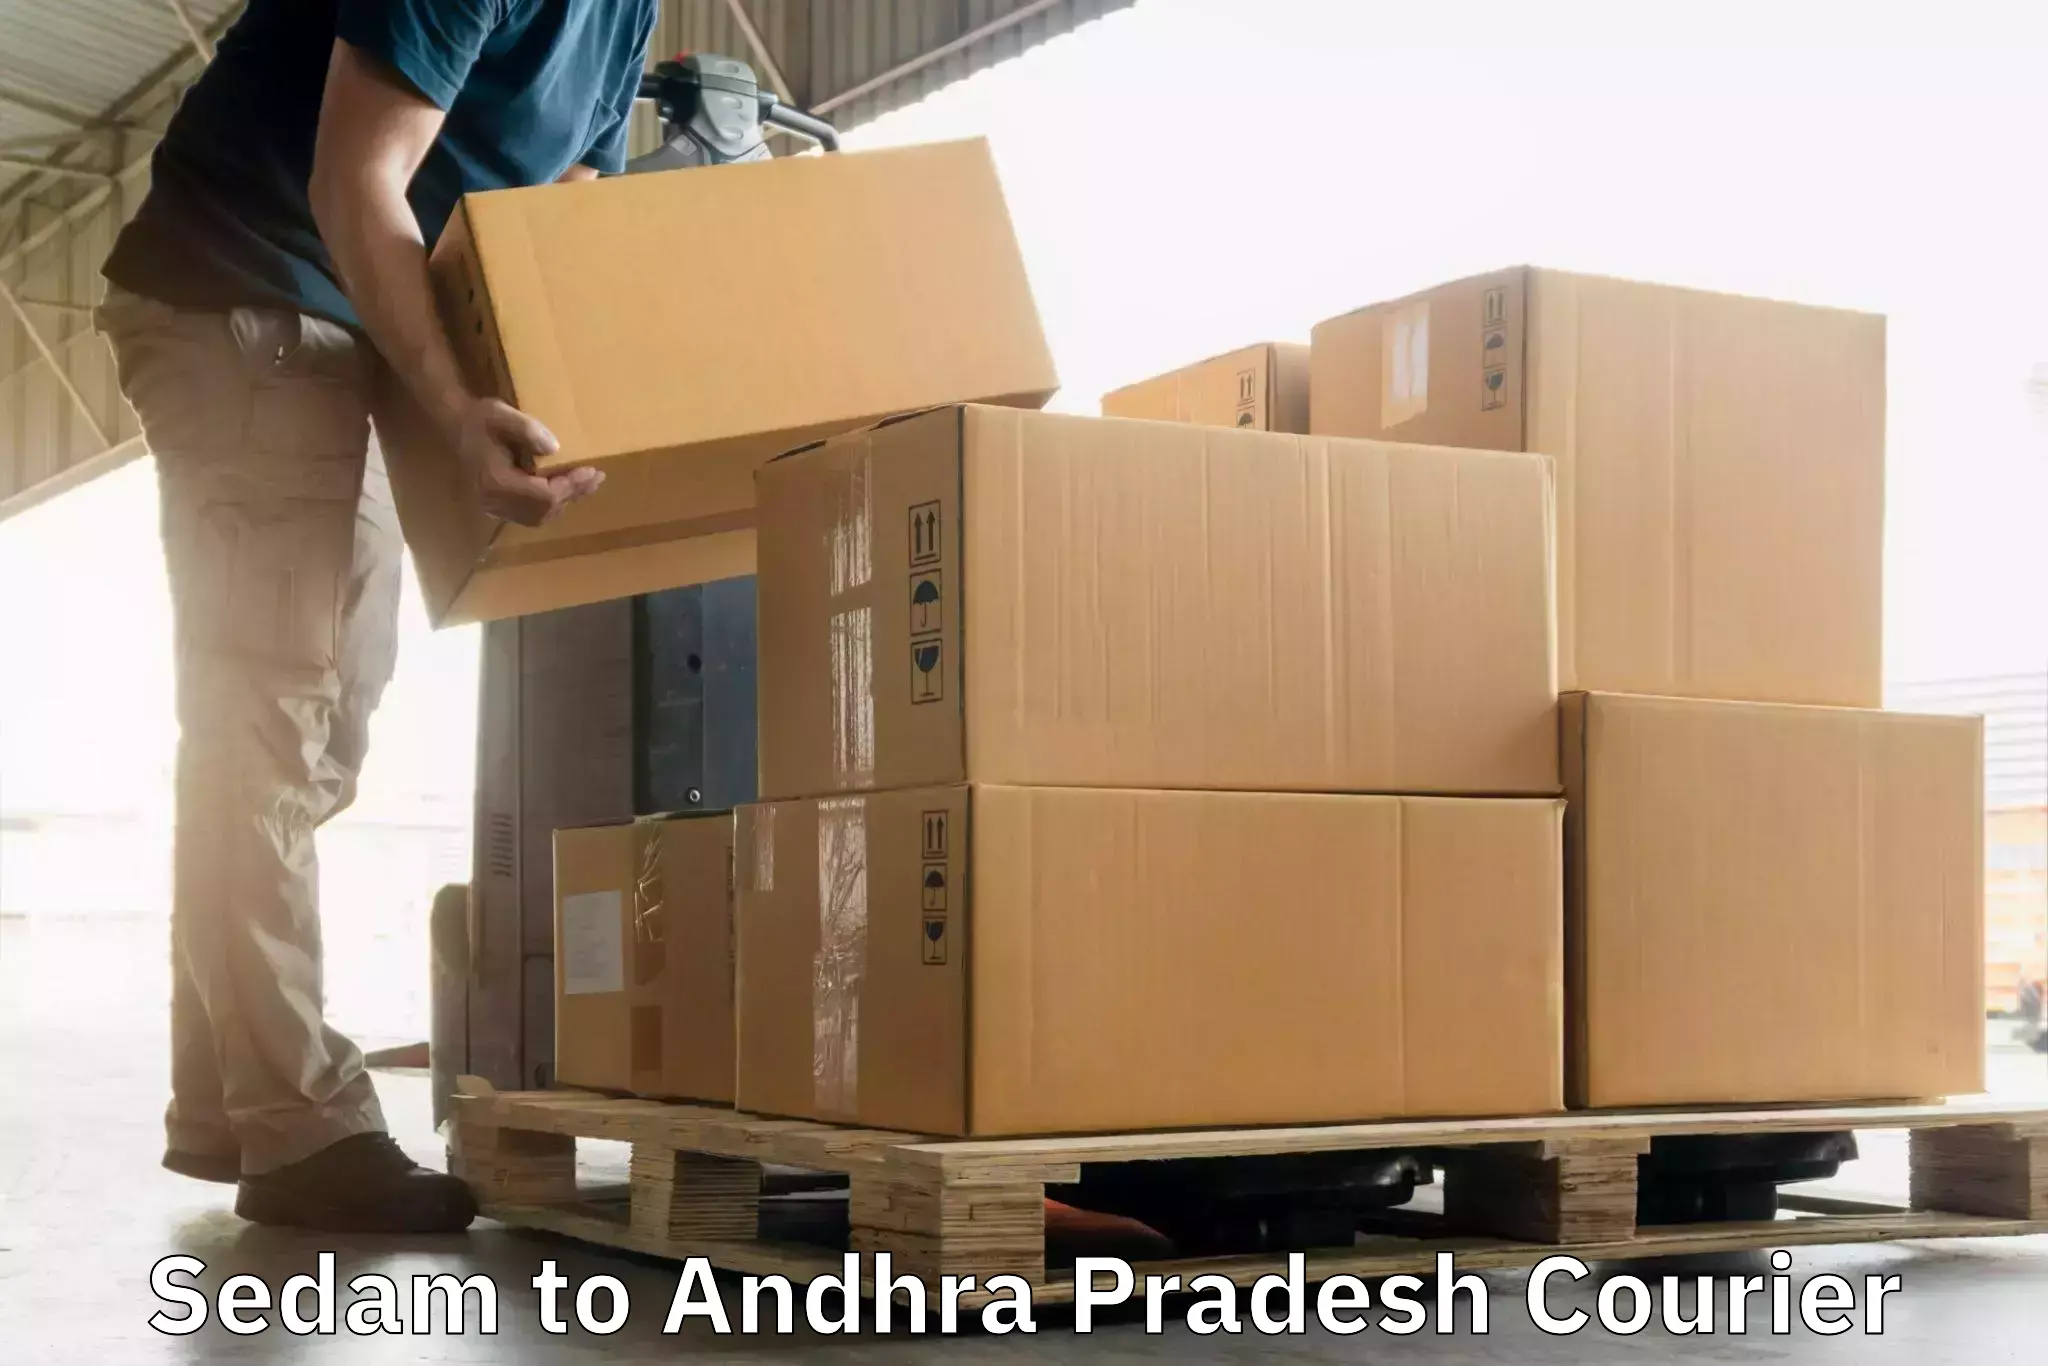 Discount courier rates in Sedam to Tripuranthakam